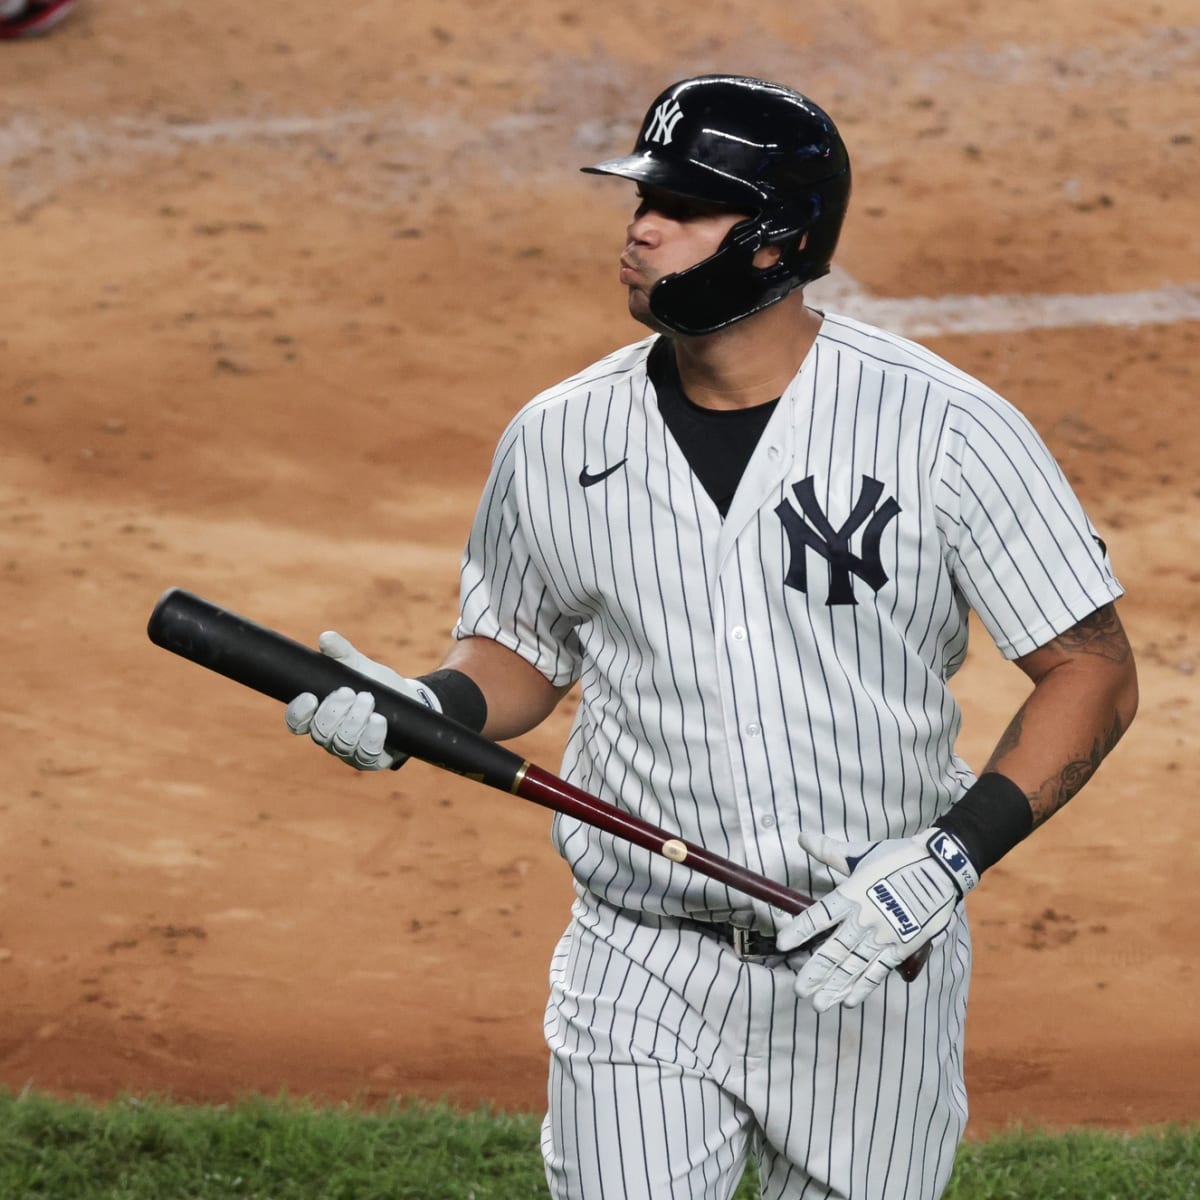 The Yankees know Gary Sanchez is one adjustment away from